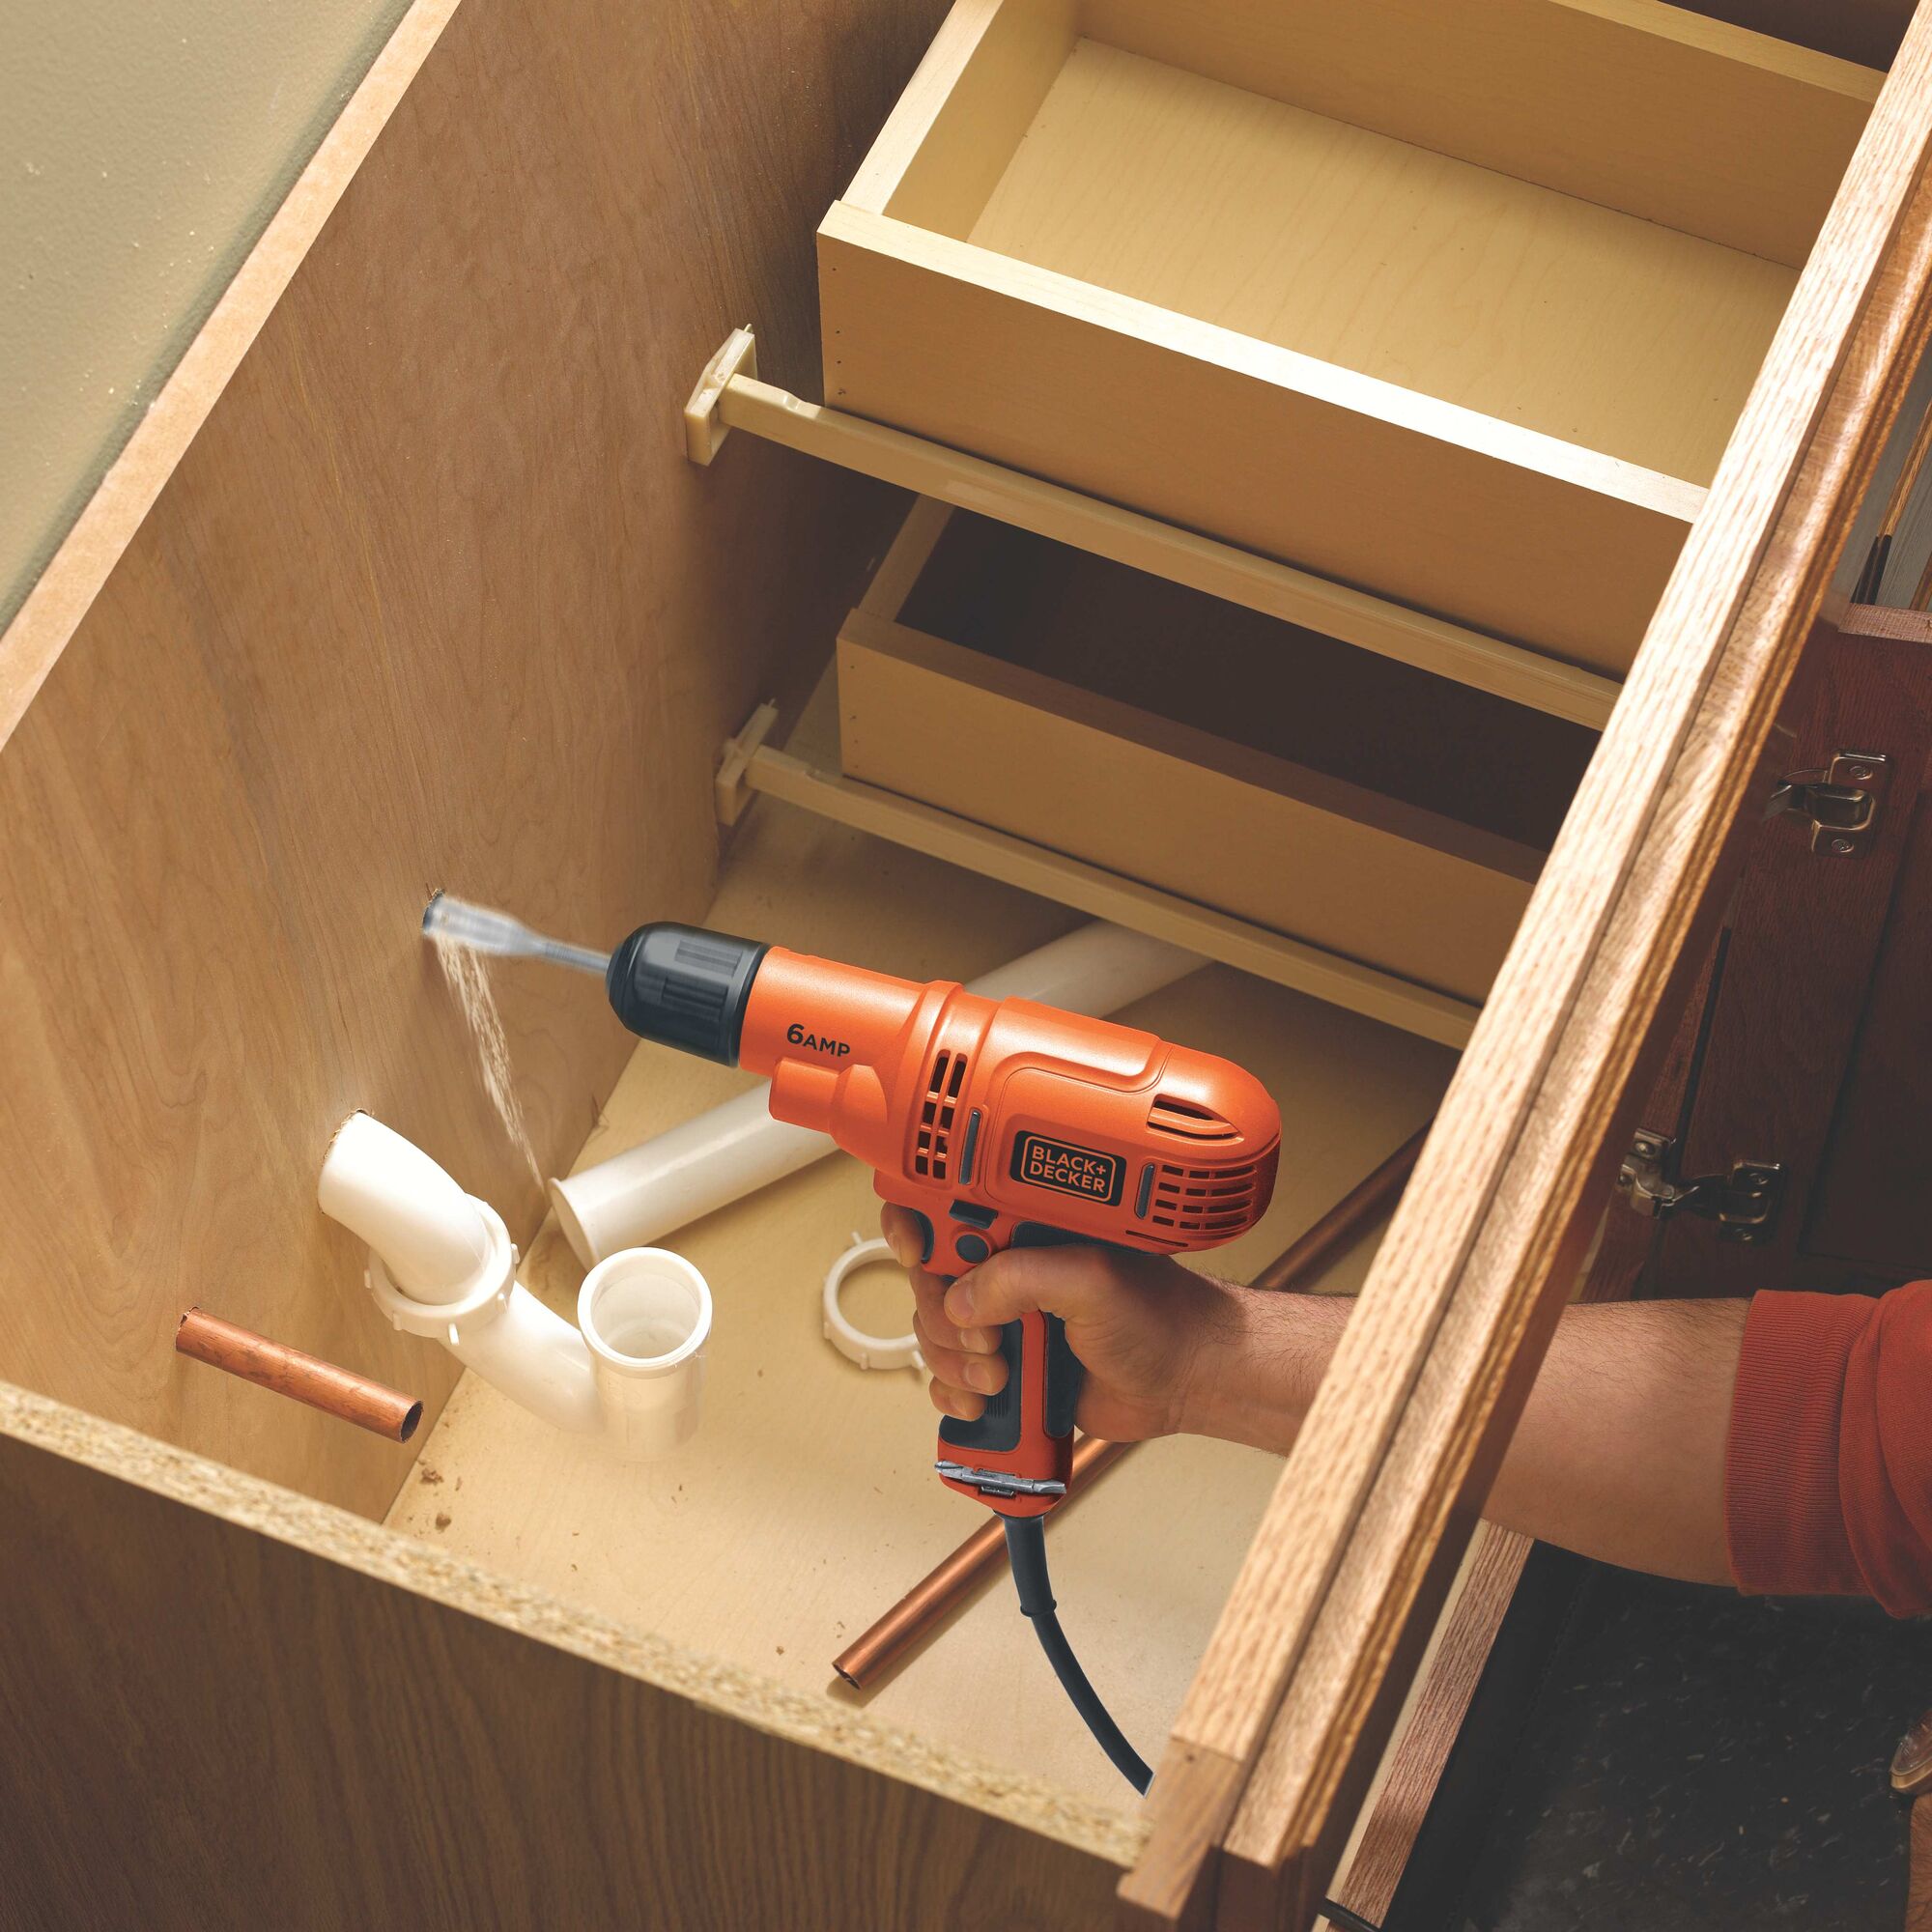 The Black and decker 6 amp 3 eighths inch drill driver being used by a person to drill a hole inside a wooden vanity